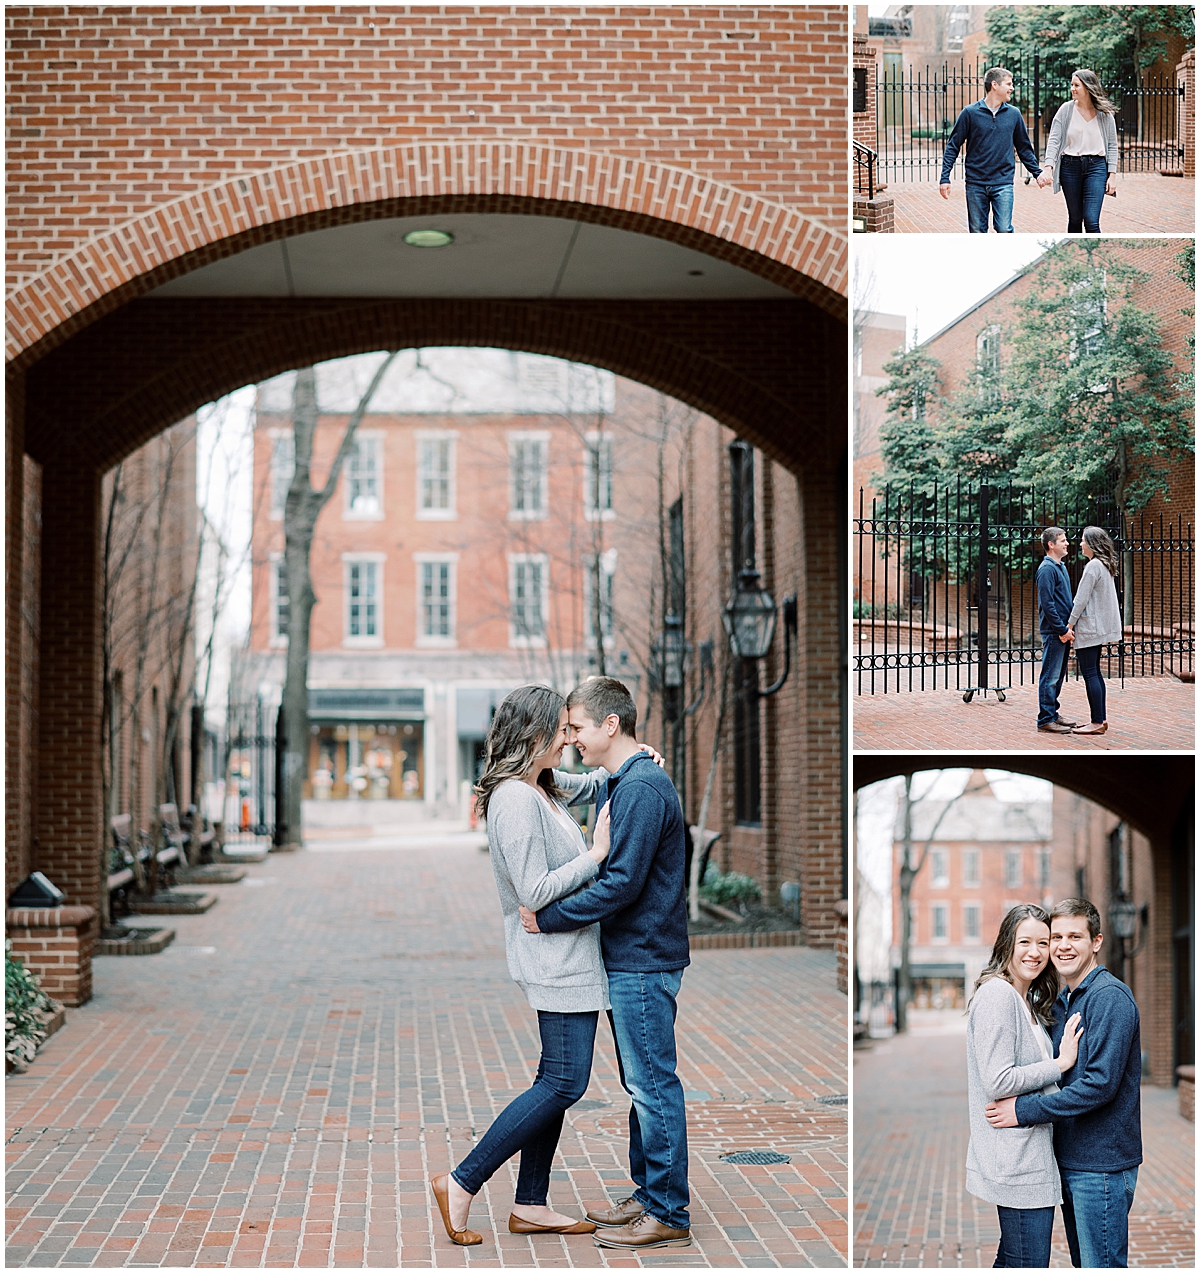 fall cloudy engagement session wearing sweaters and long jeans in Pennsylvania 